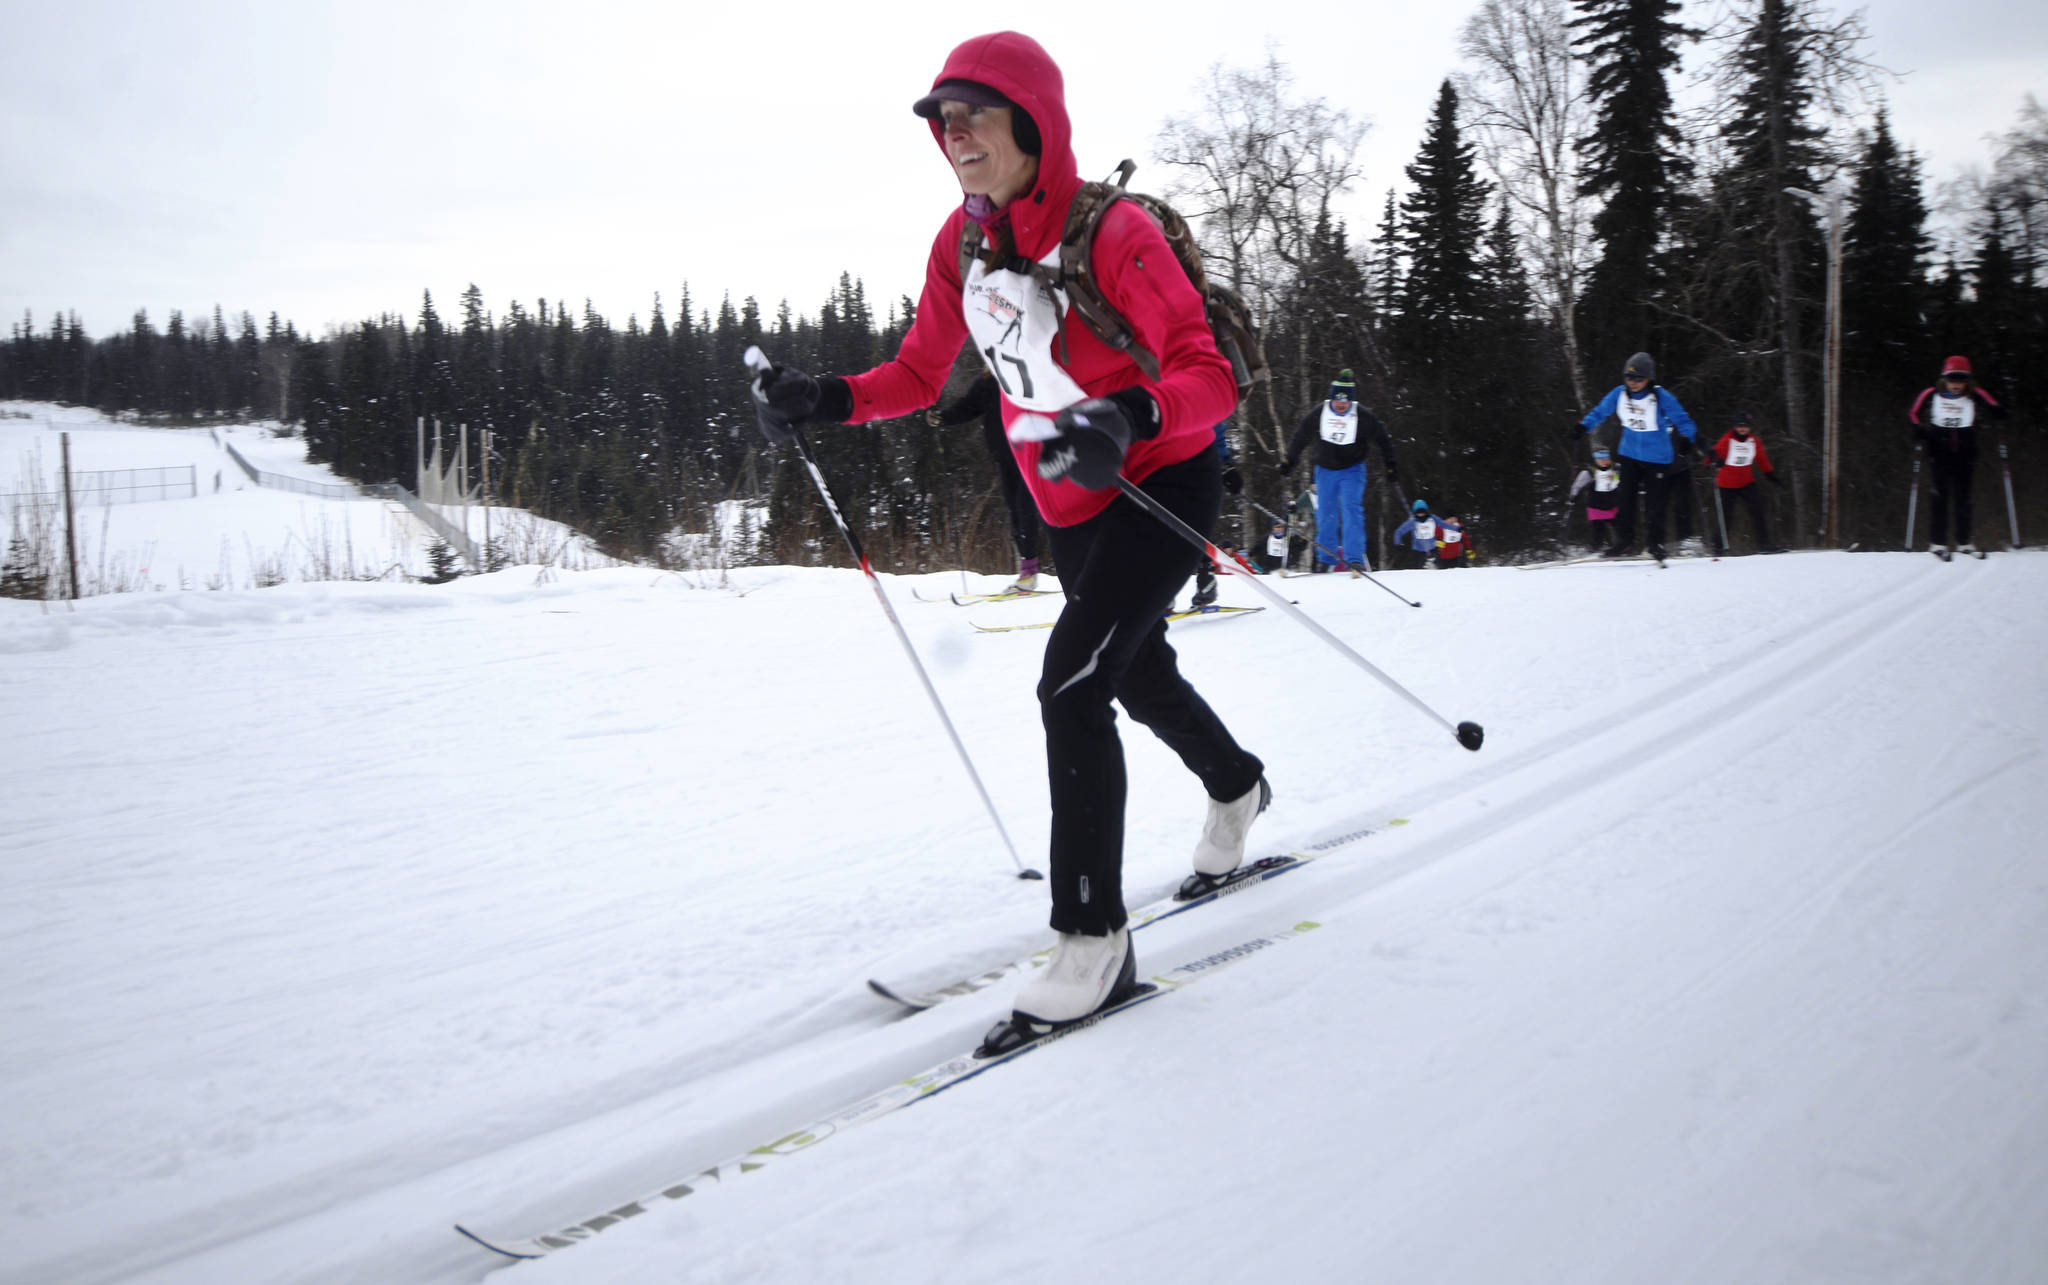 Classic skier Laura Griffin reaches the top of the first hill in the 20-kilometer Tour of Tsalteshi ski race on Sunday near Soldotna.